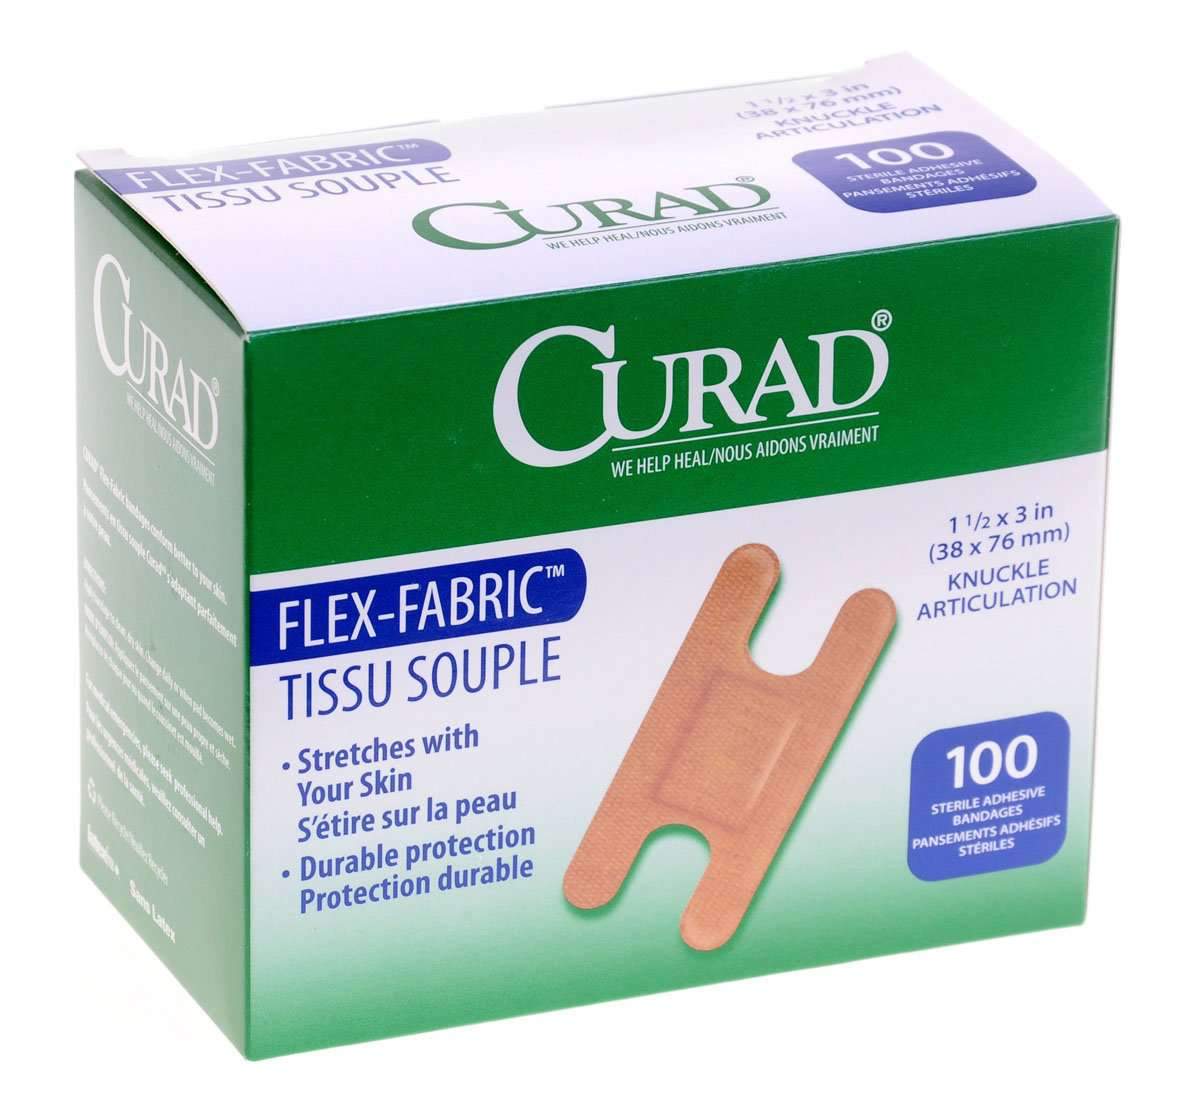 Wound Care - Specialized Products For Wound Care Patients & Caregivers